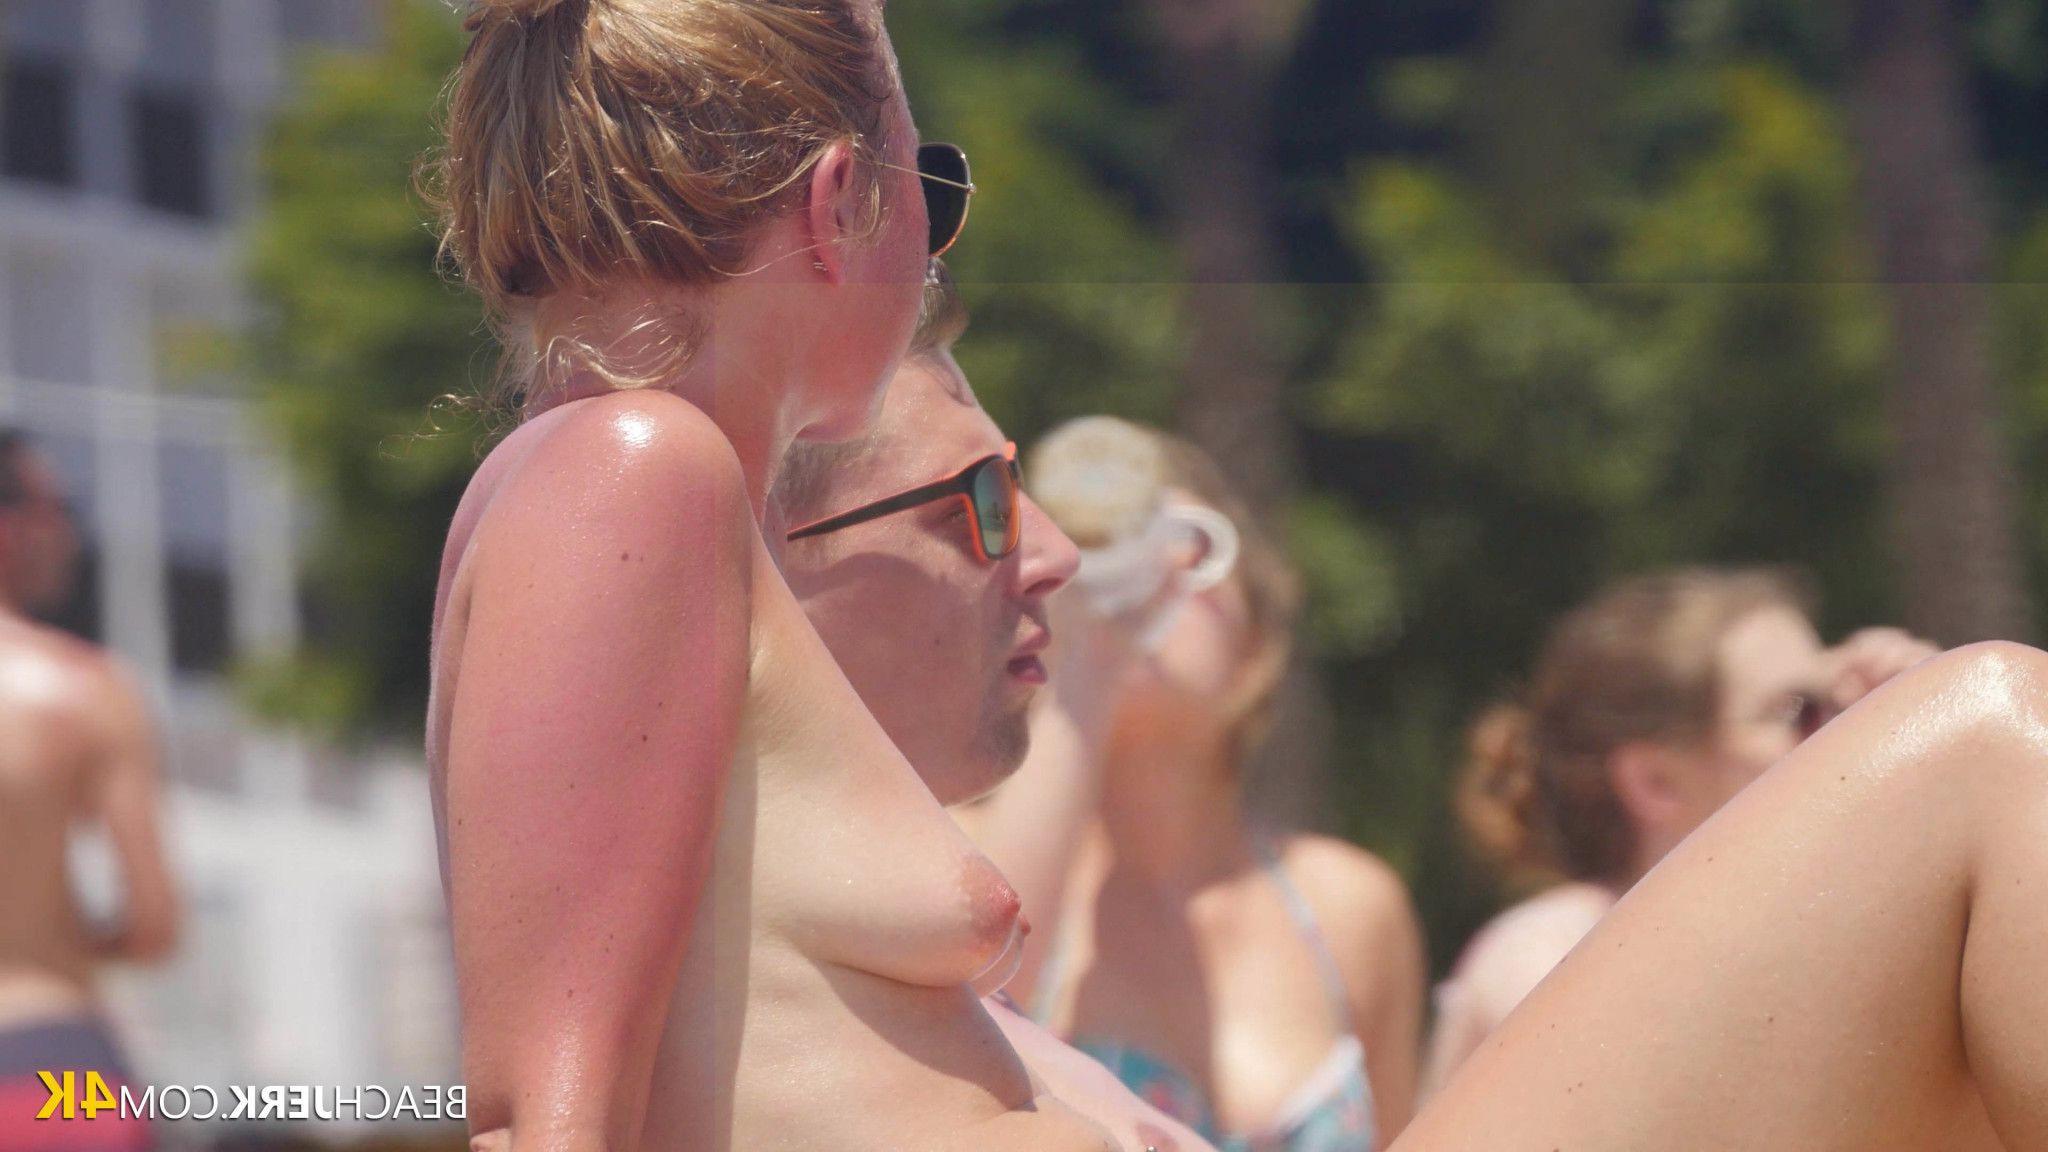 Slender girl applying sunscreen to her breasts Photo